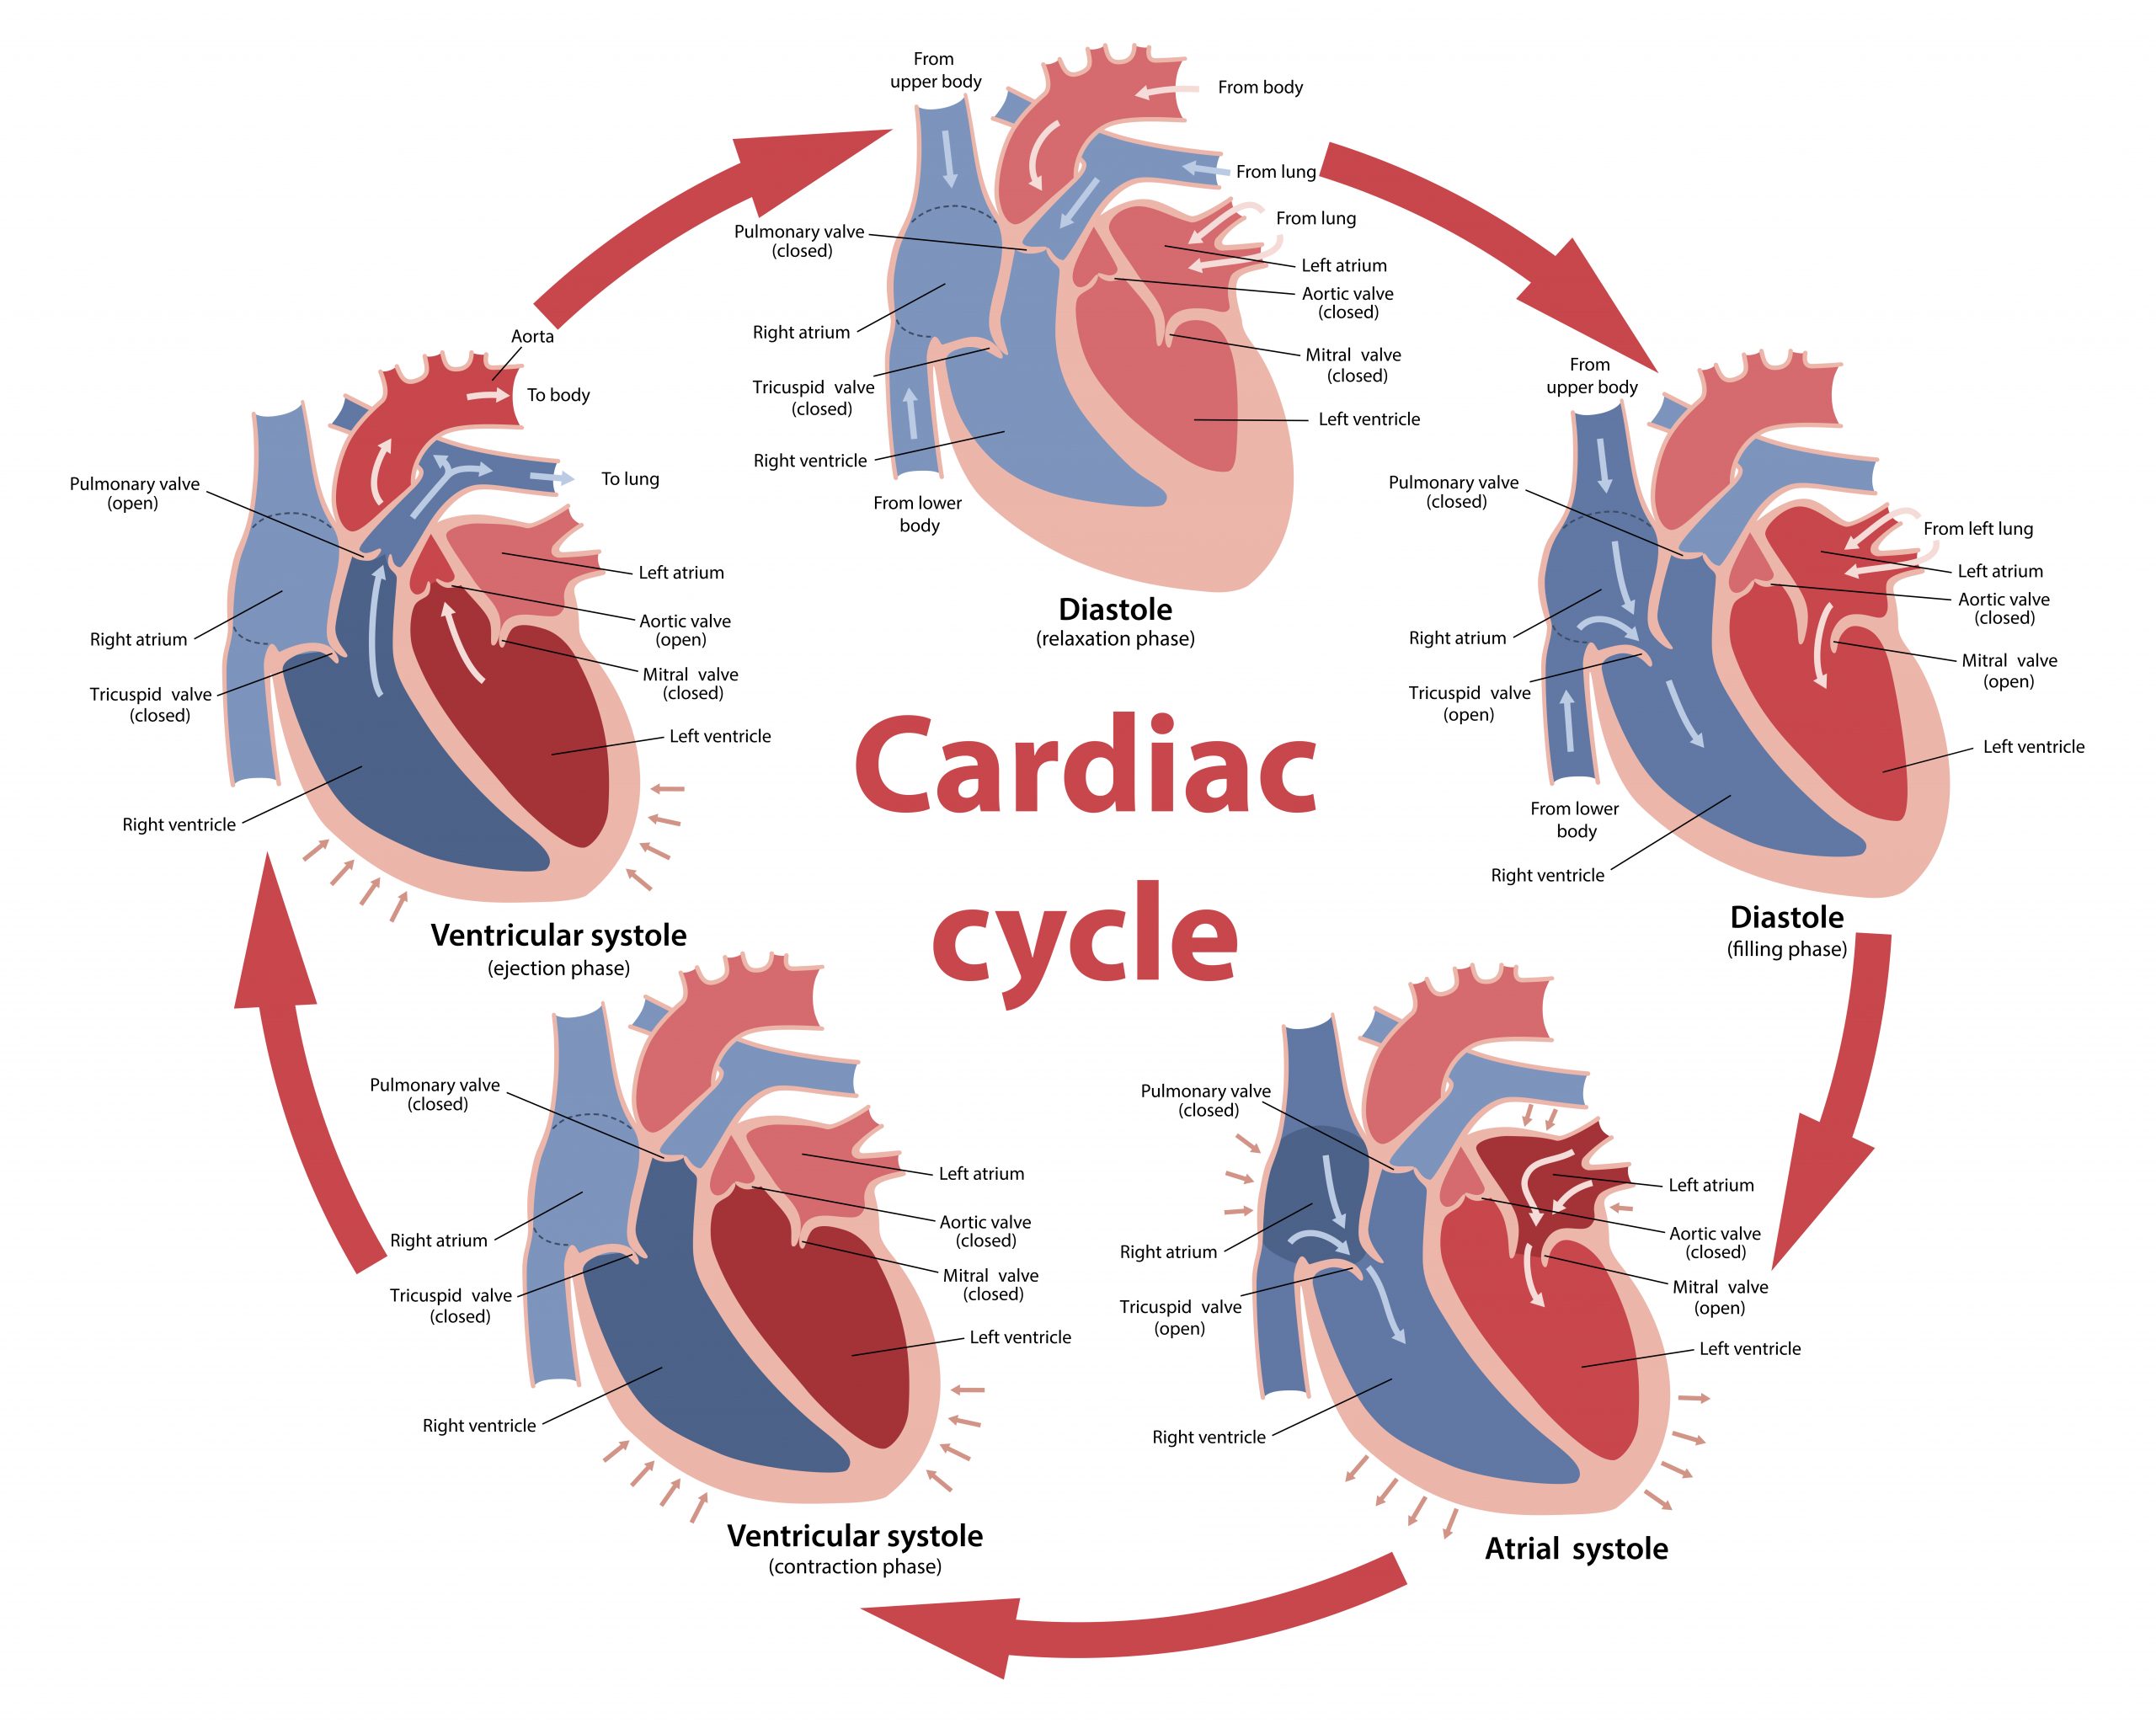 This image will help visualize the cardiac cycle.